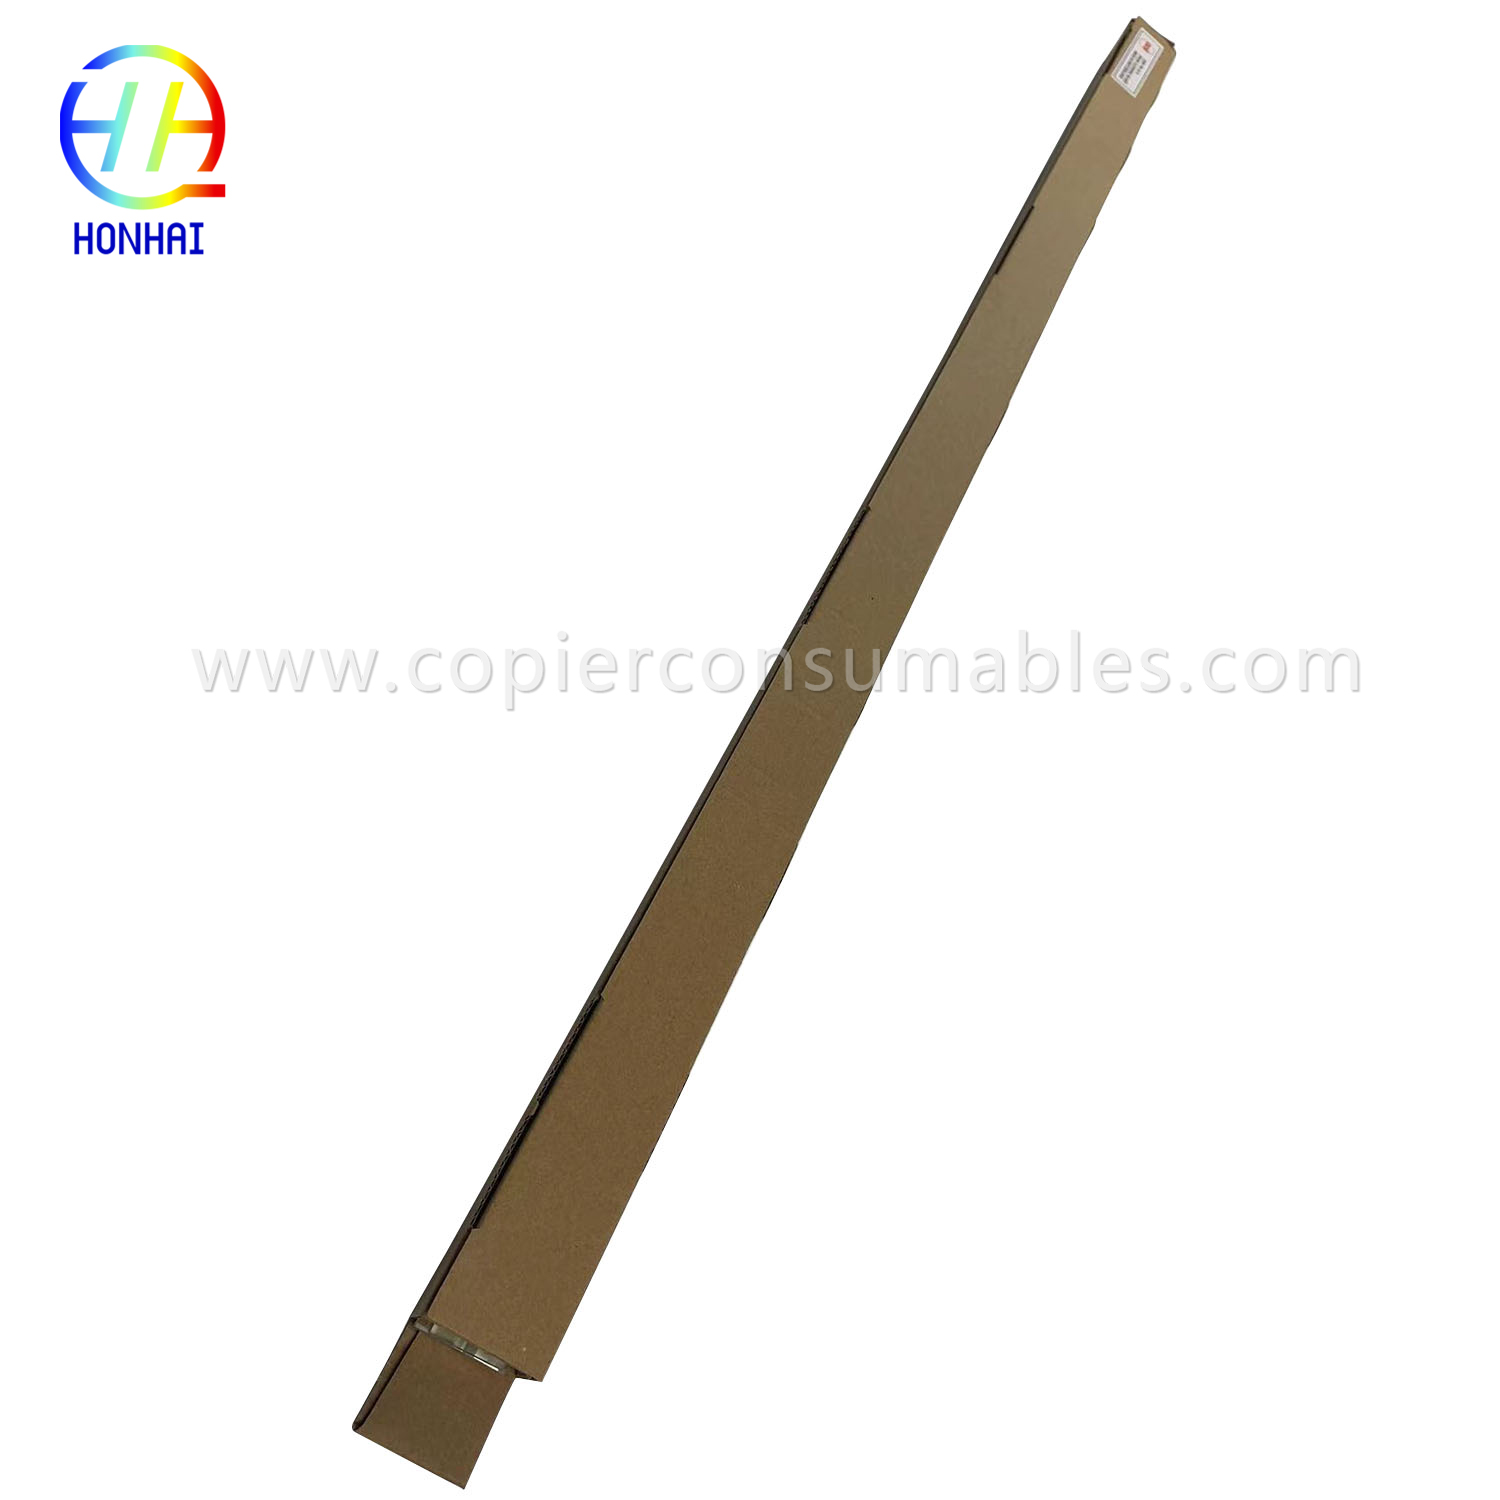 Drum Cleaning Blade for Oce 9300 9400 9600 TDS300 400 600 700 Pw300 340 360 365 Imported Material